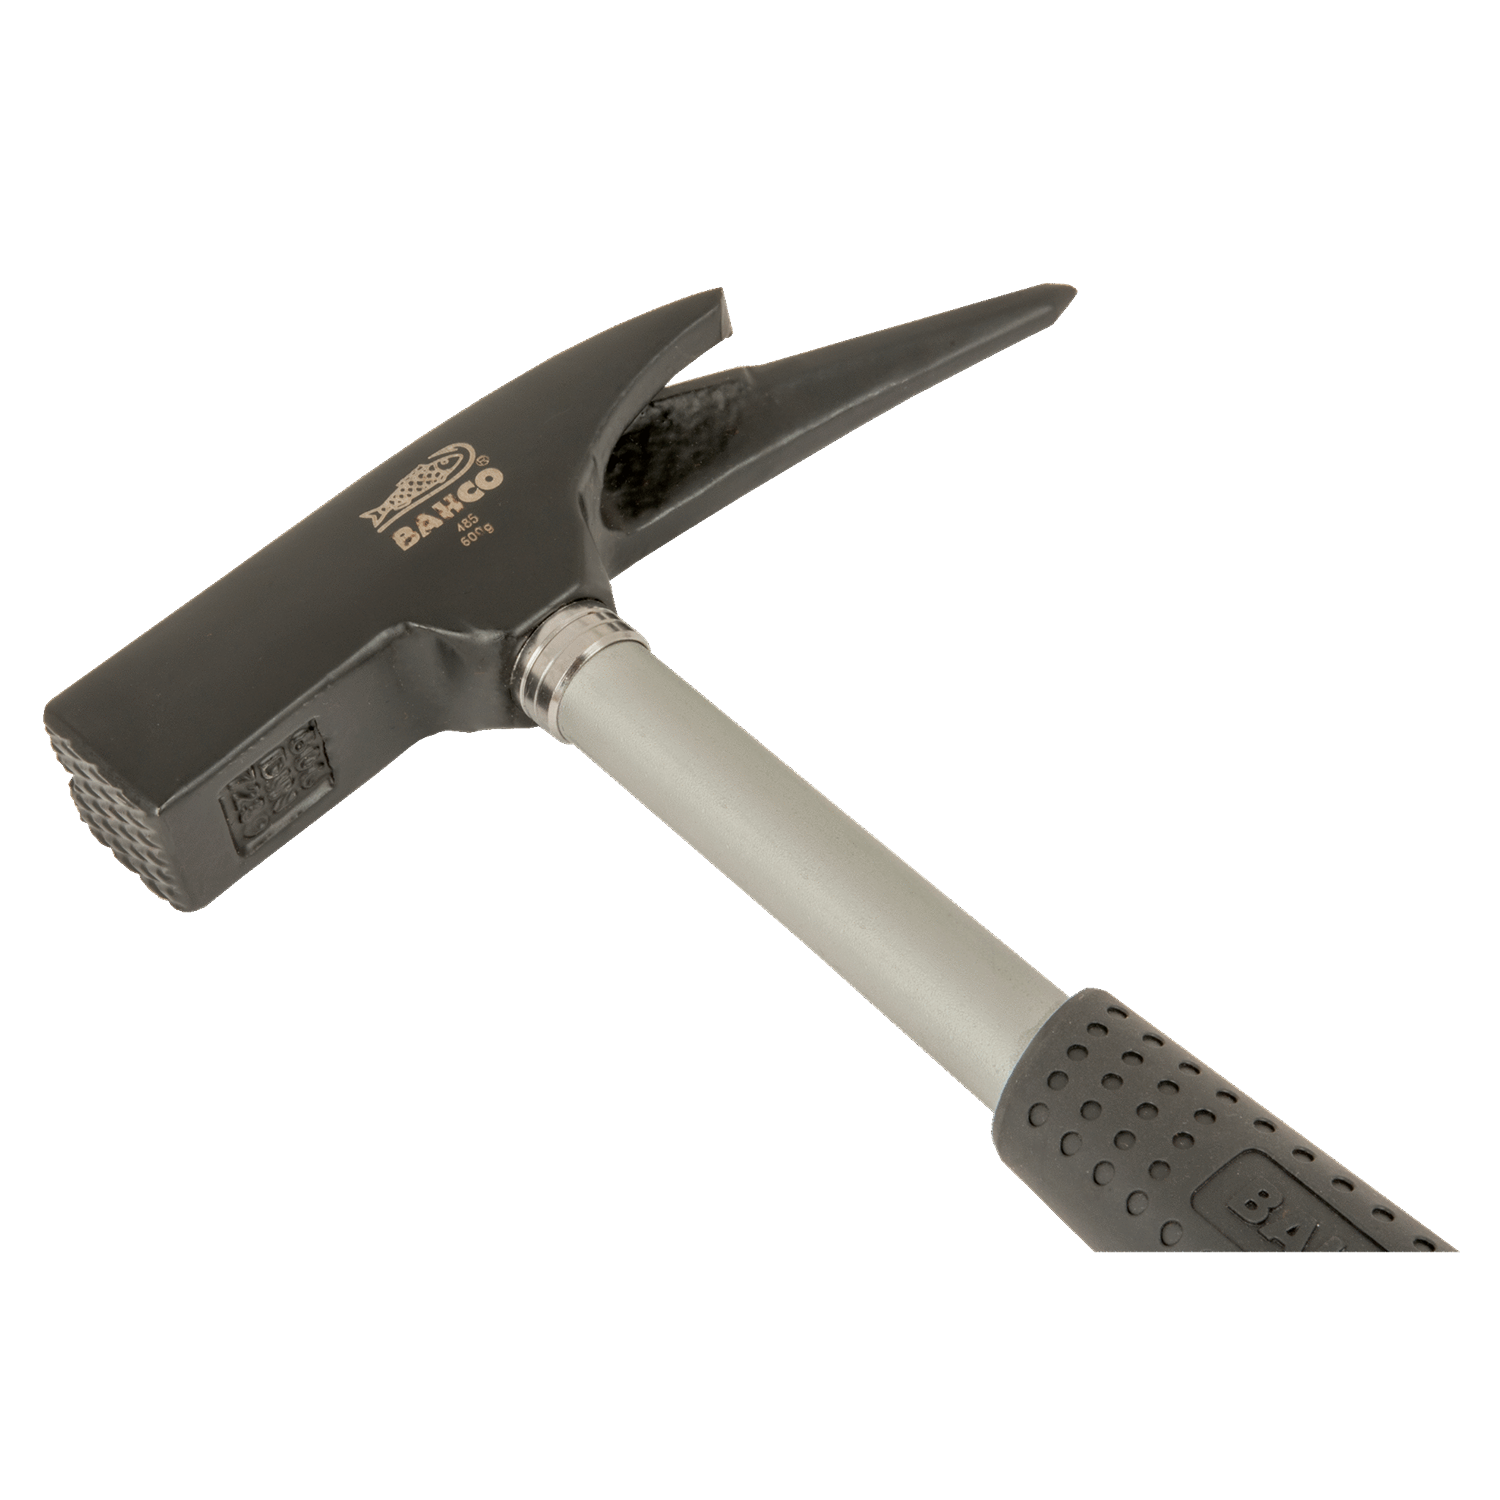 BAHCO 485 Carpenter Hammer Spike Claw with Tubular Steel Shaft - Premium Carpenter Hammer from BAHCO - Shop now at Yew Aik.